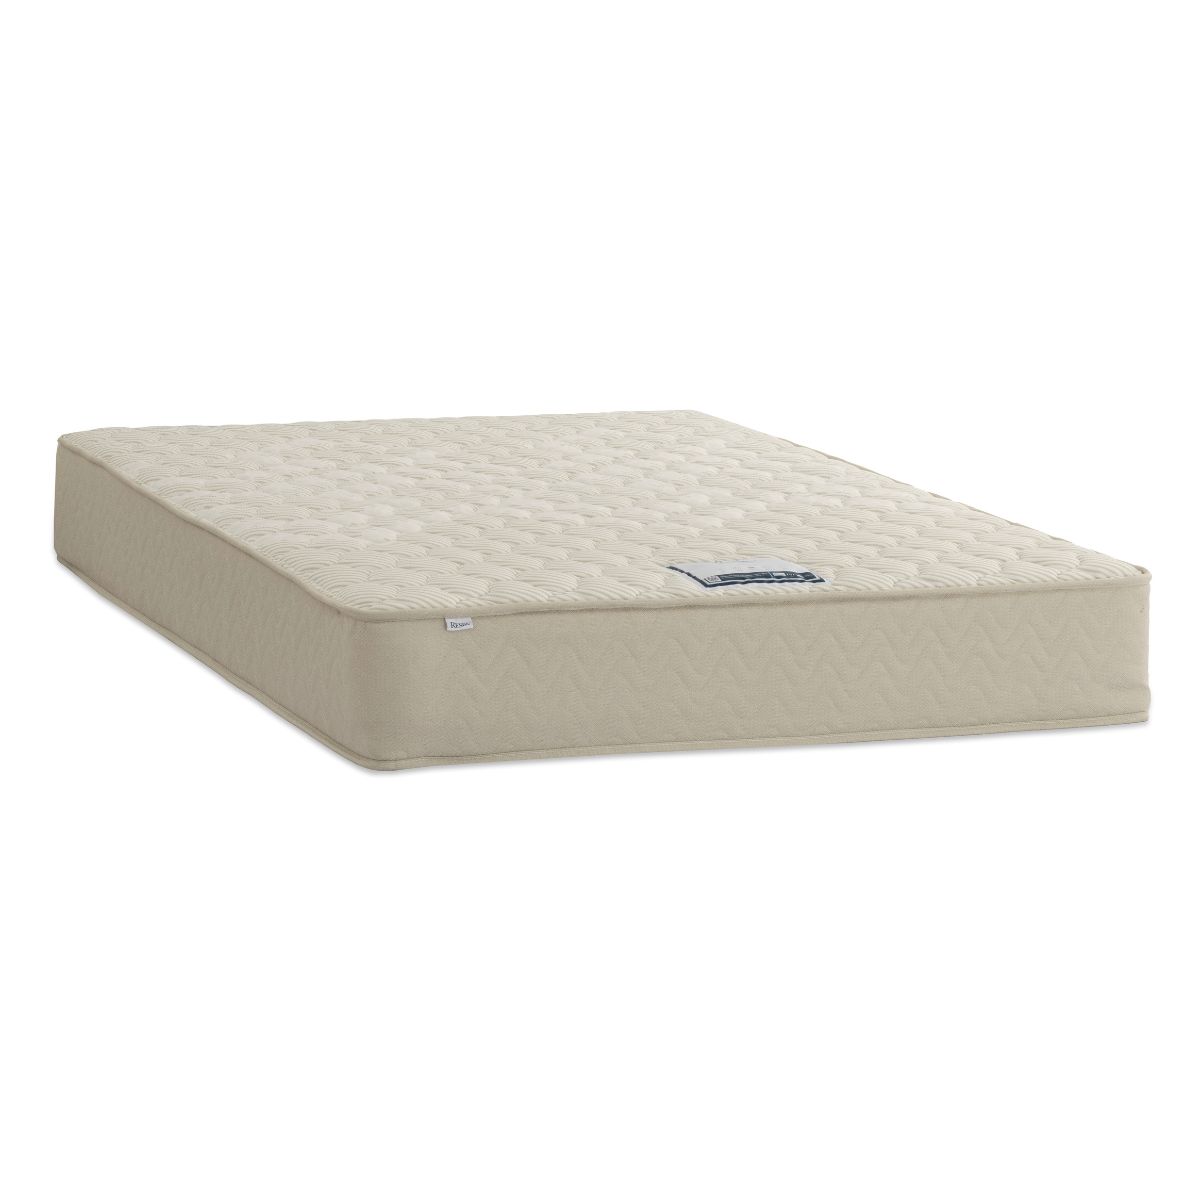 Formation Orthopaedic Mattress by Respa - 4